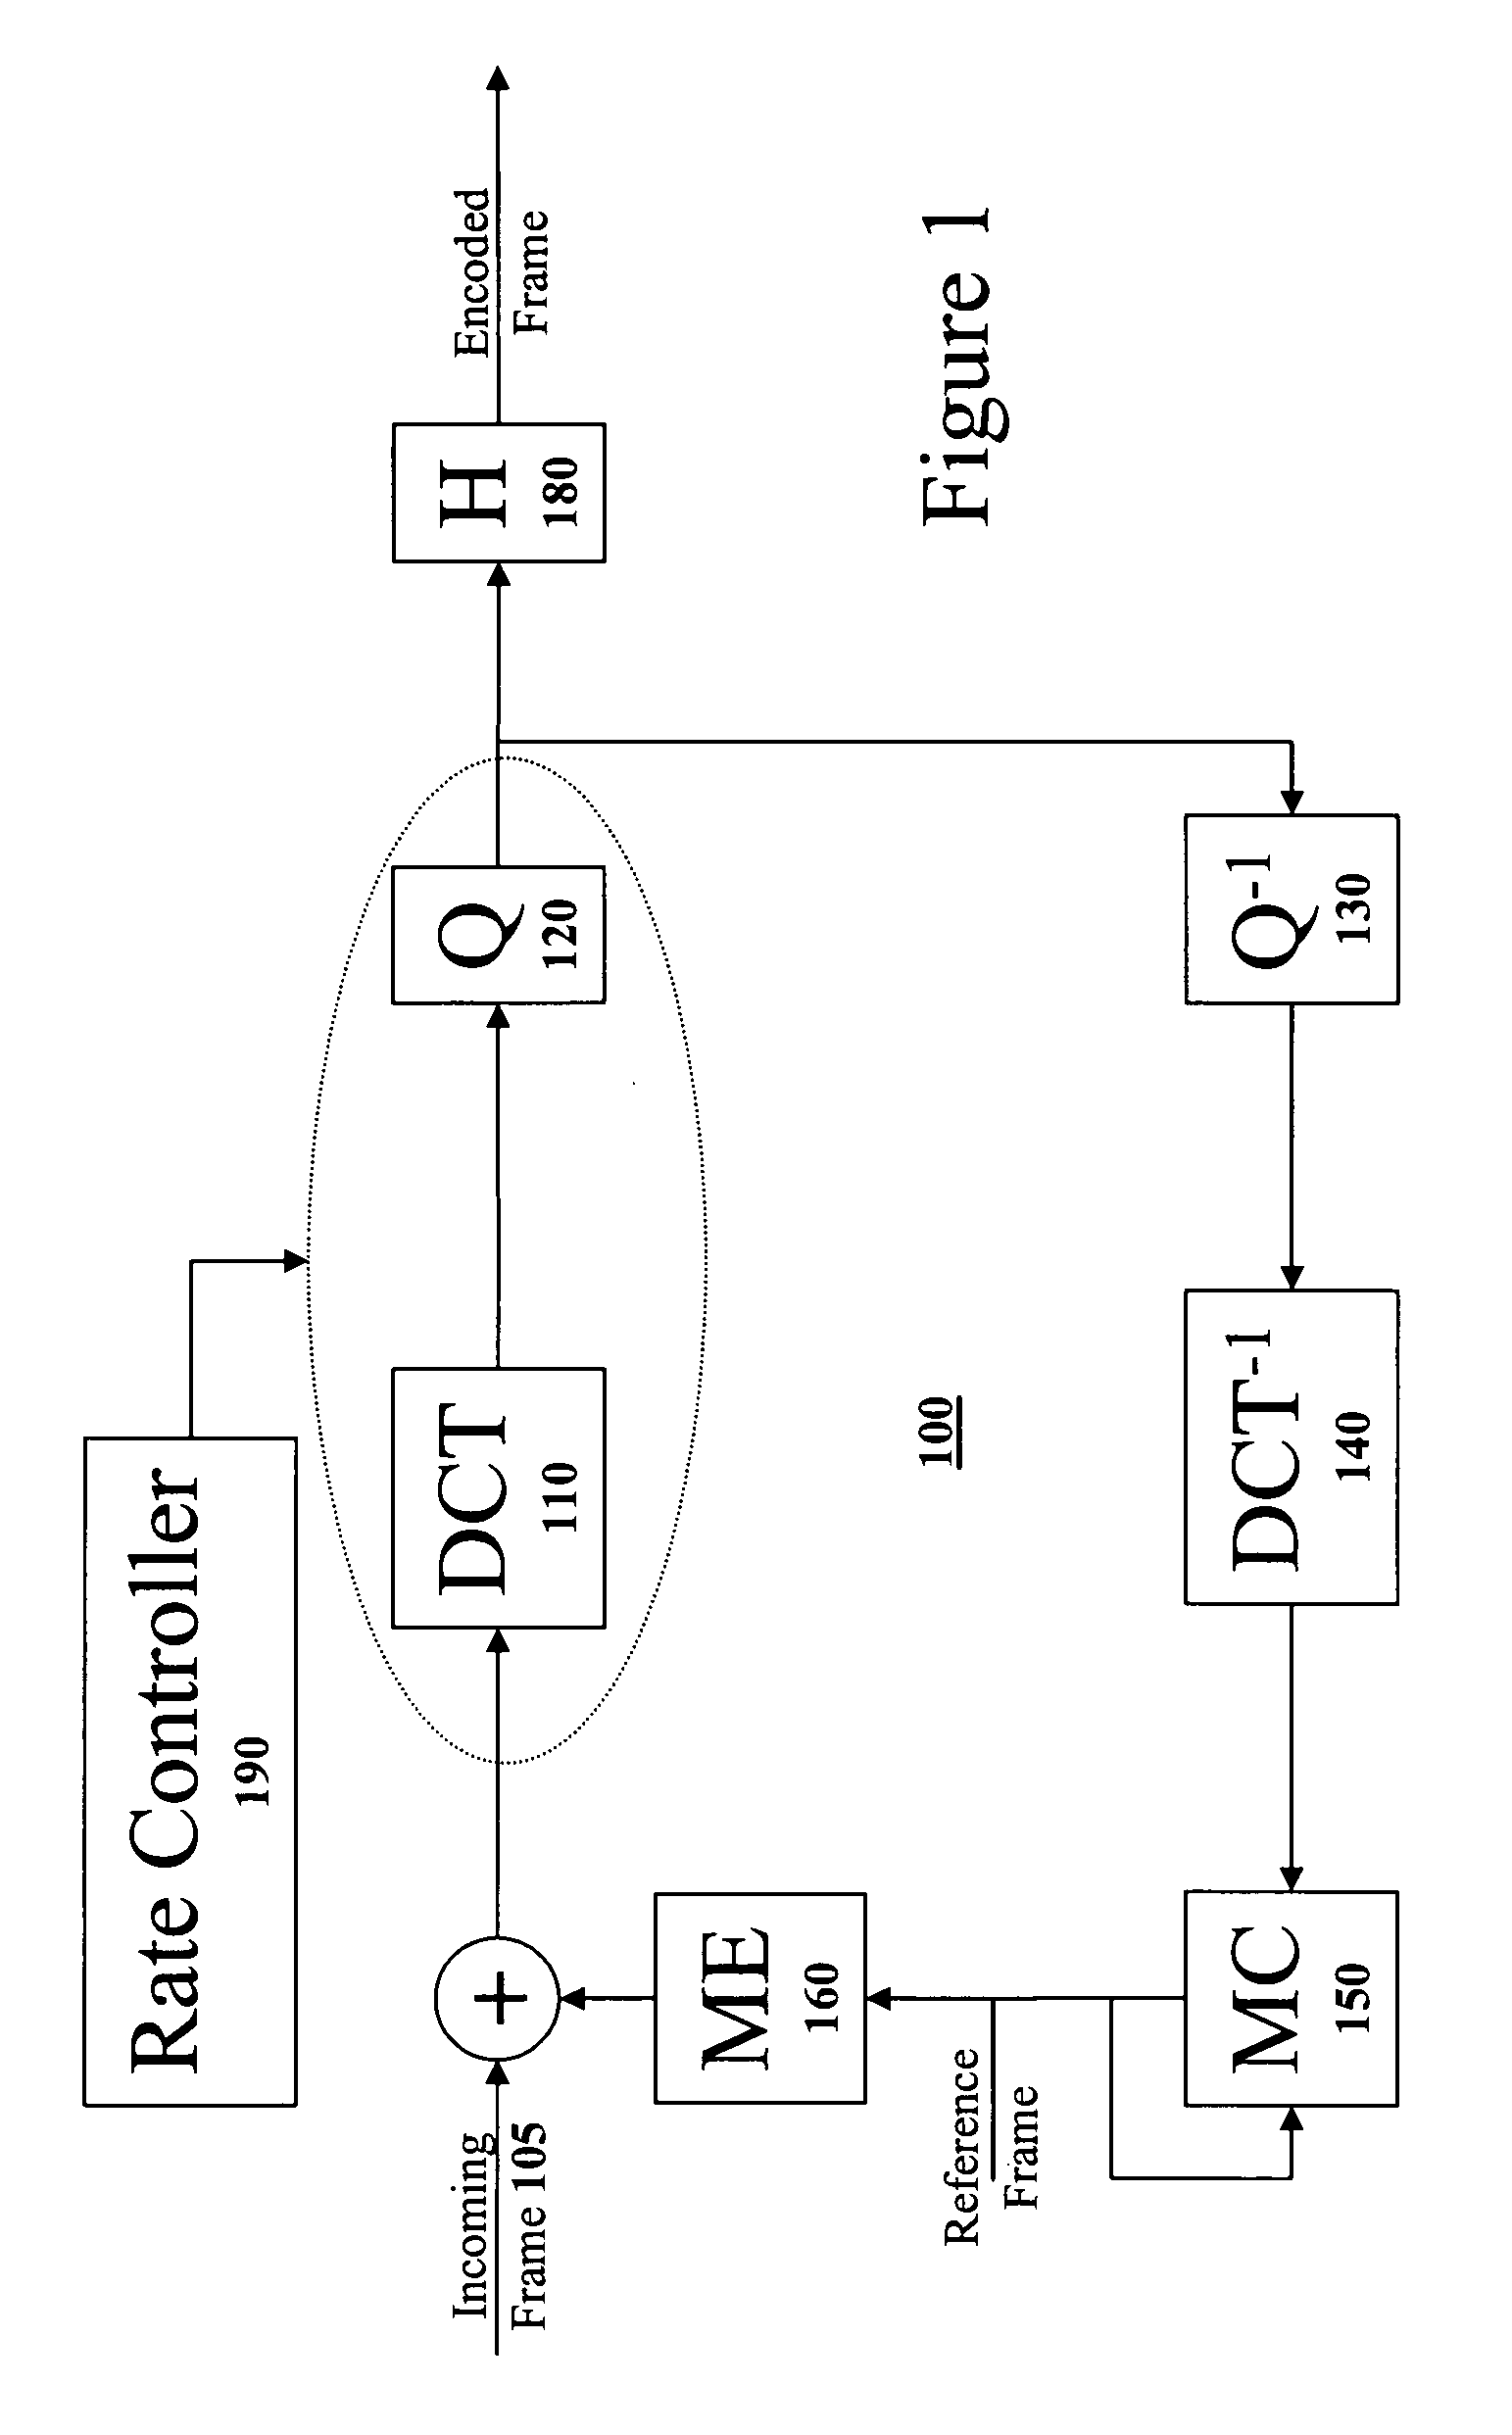 Method for implementing an improved quantizer in a multimedia compression and encoding system